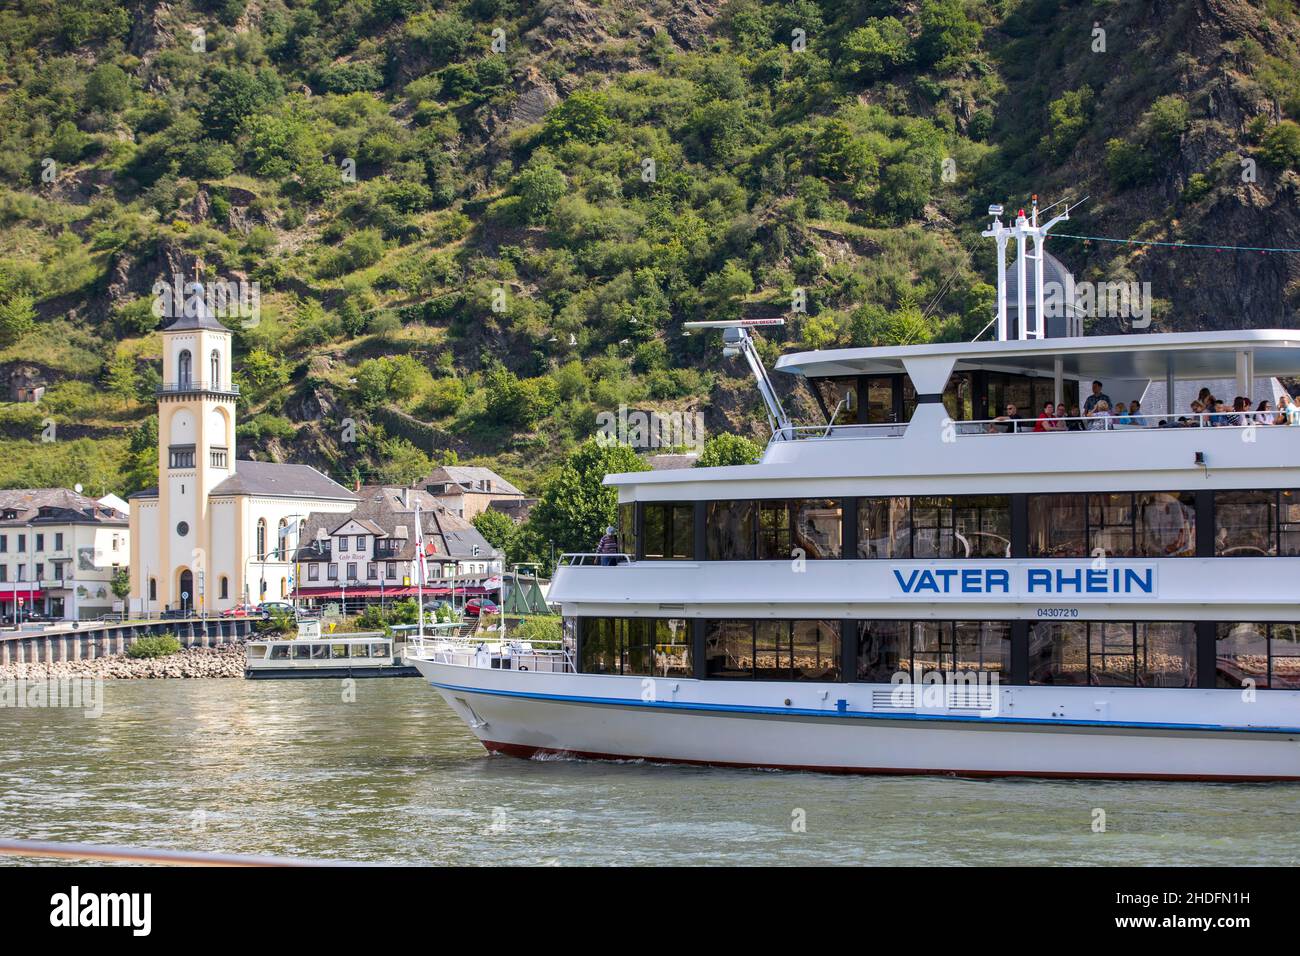 Trip with the excursion boat Vater Rhein in the Upper Middle Rhine Valley, UNESCO World Heritage Site, St. Goarshausen, Rhineland-Palatinate, Germany Stock Photo